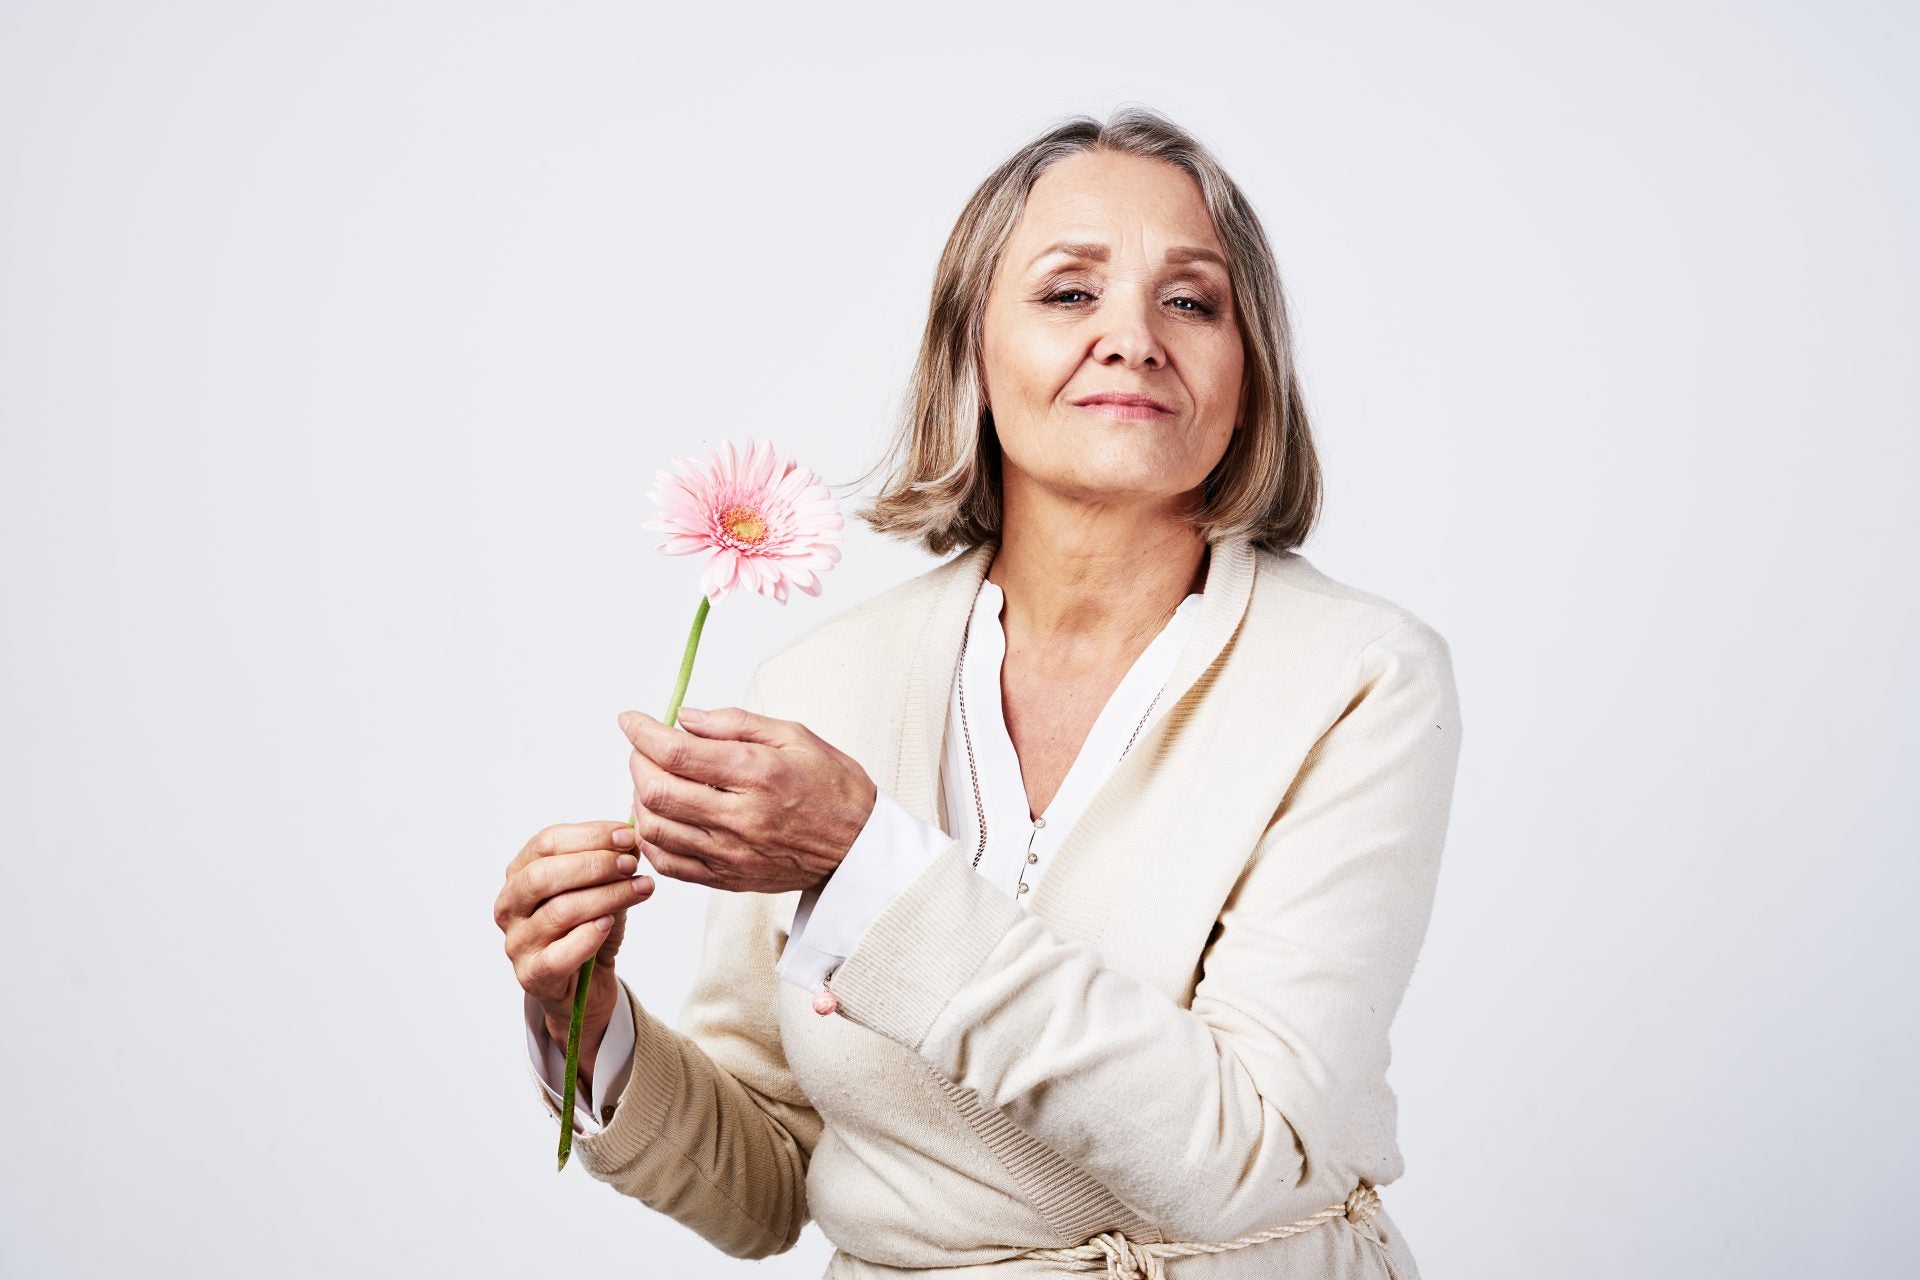 Top 5 Myths about Menopause We Should Stop Believing